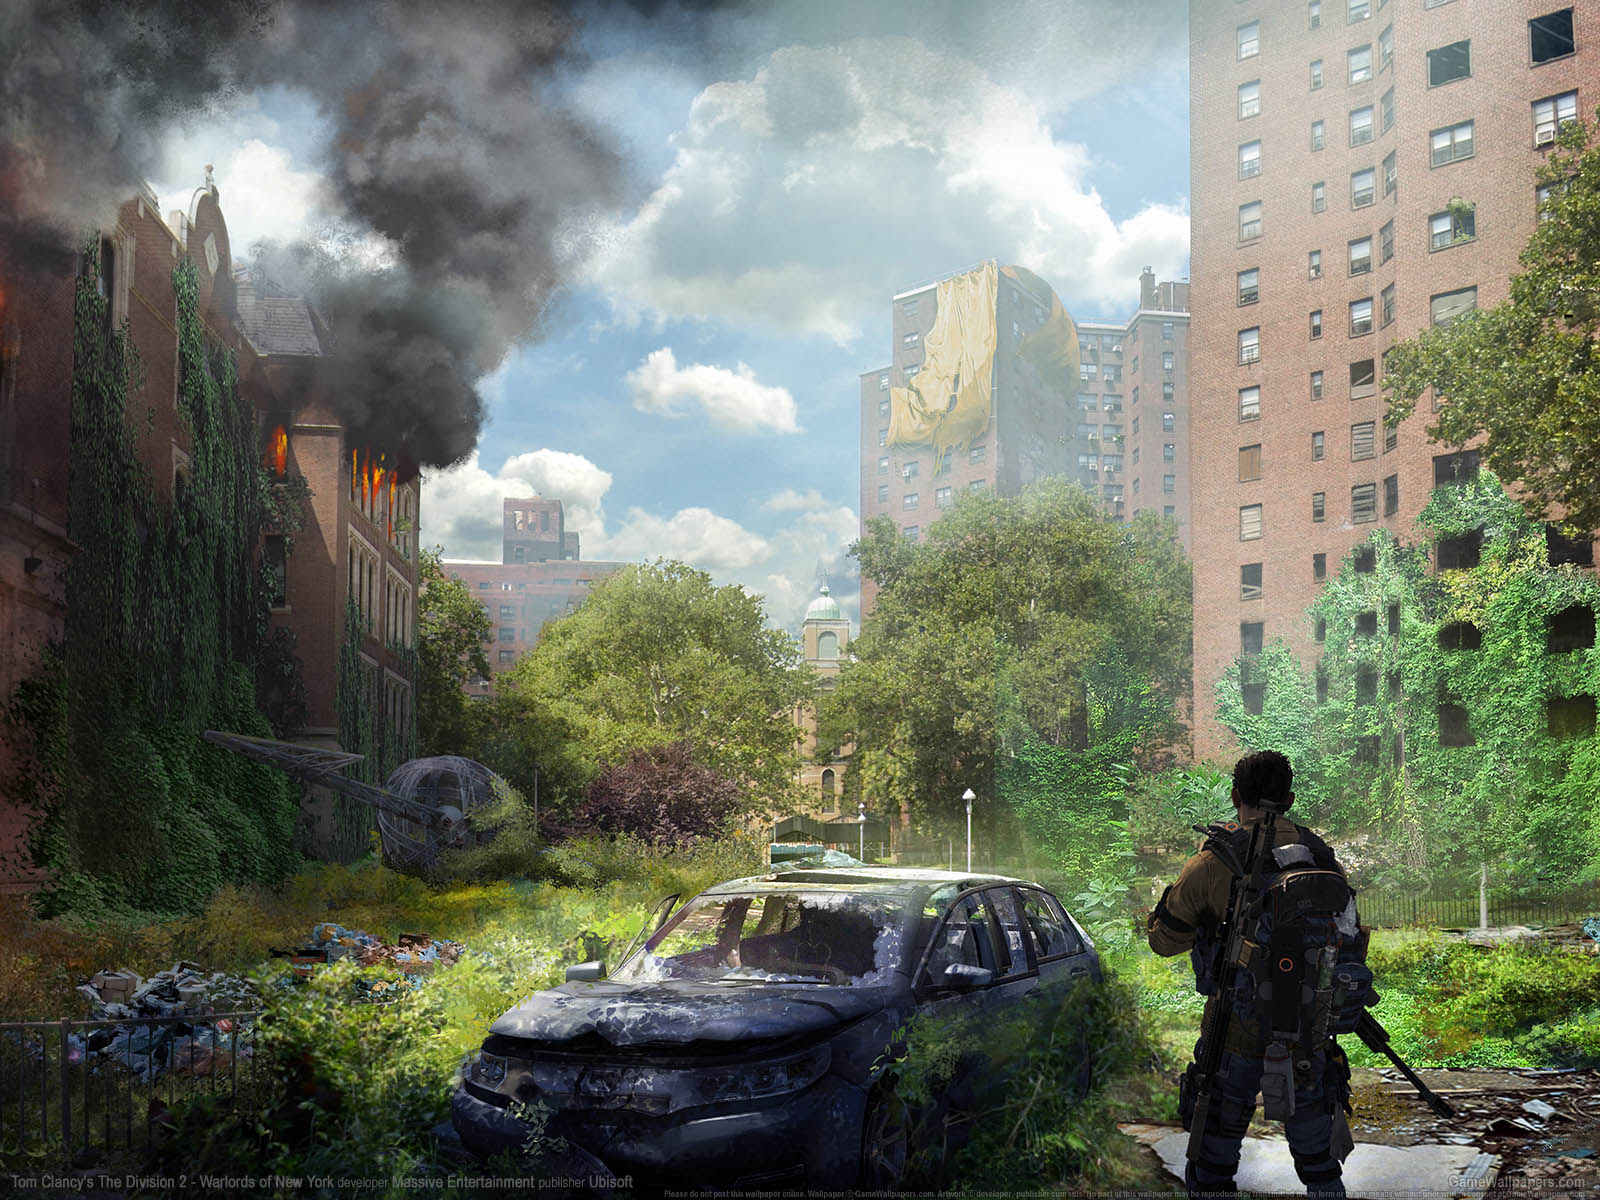 Tom Clancy%25255C%252527s The Division 2 - Warlords of New York wallpaper 03 1600x1200